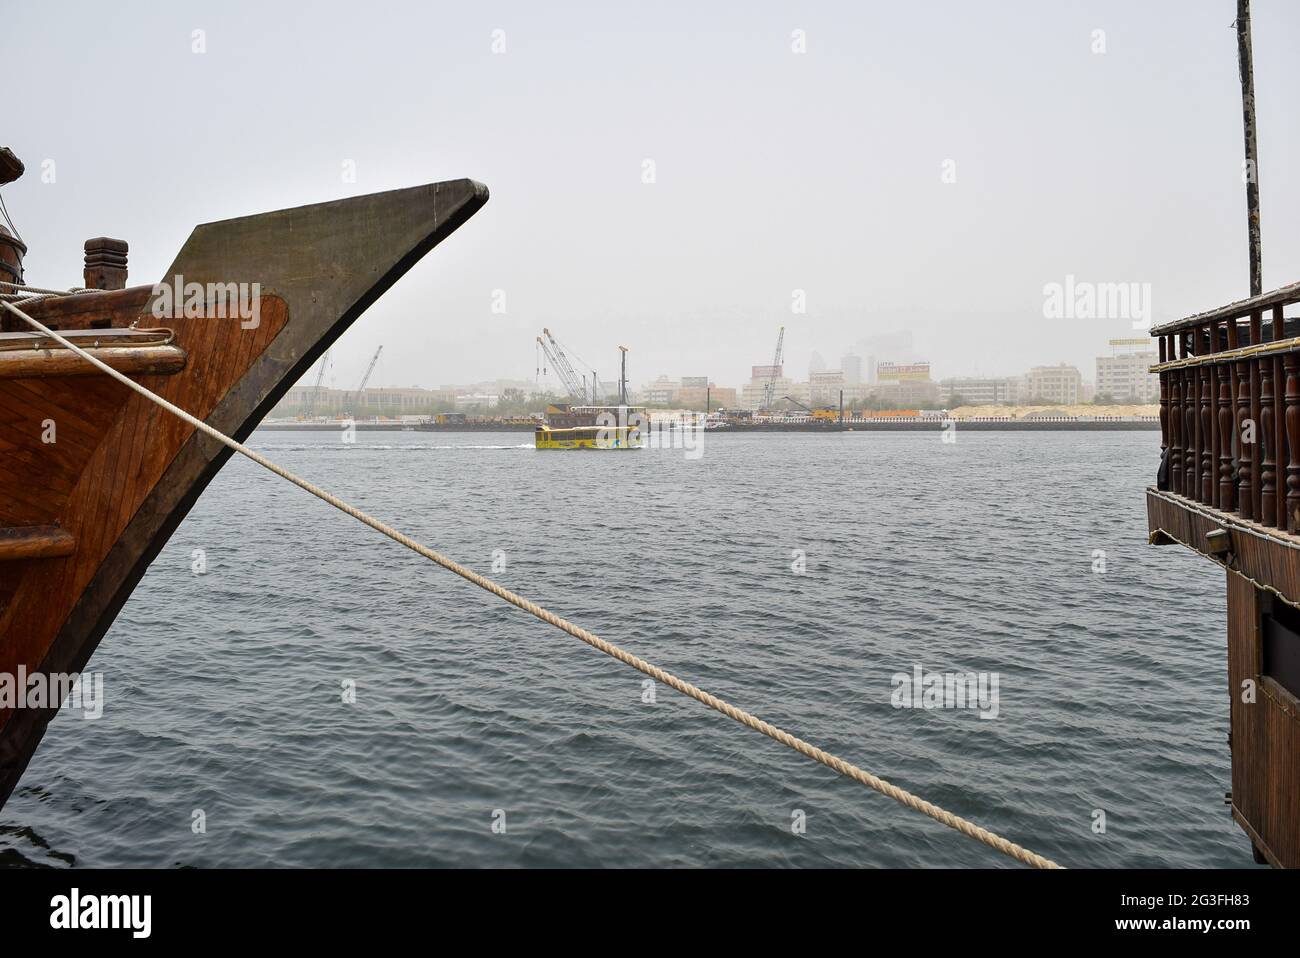 Edge of traditional wooden boat with restaurant in Dubai creek Area, UAE. Stock Photo